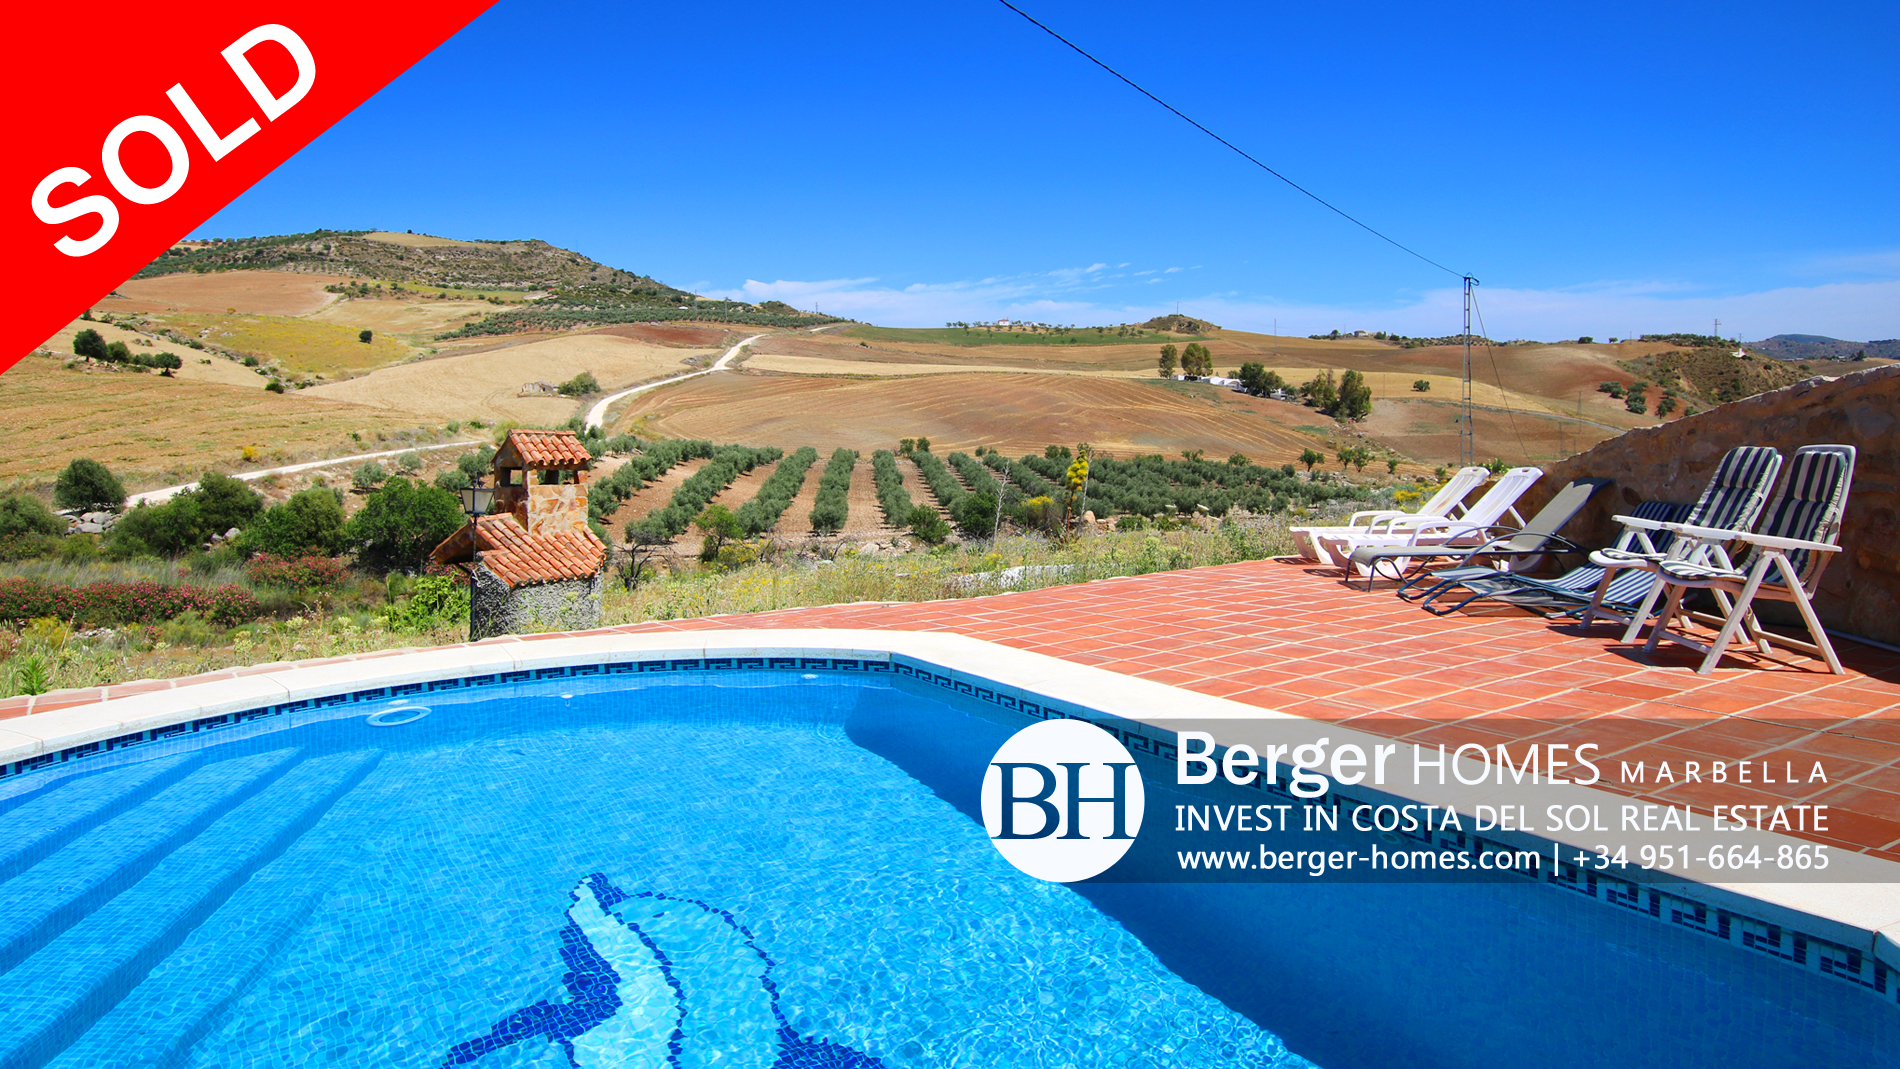 Alora – Charming Finca surrounded with olives in Antequera – Costa Del Sol